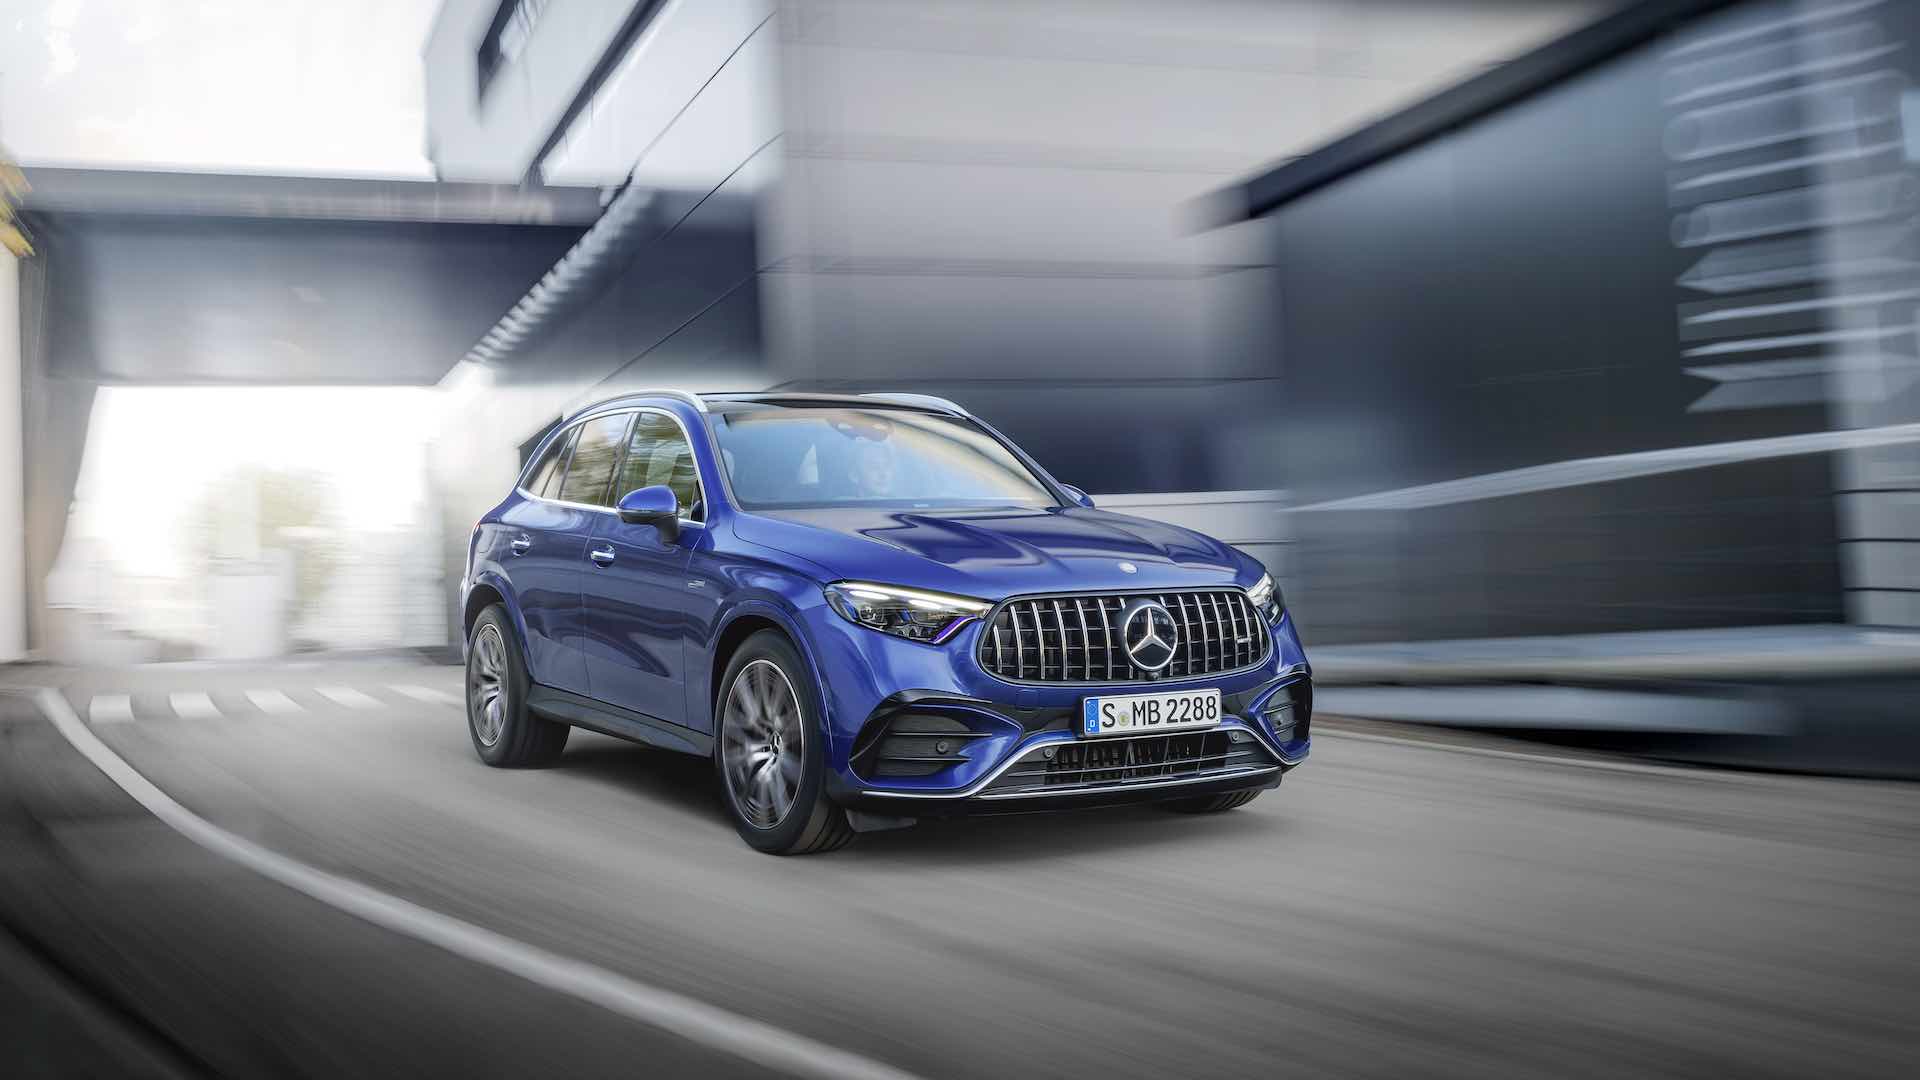 Elevate your drive with Mercedes-AMG's new GLC 43 4MATIC SUV